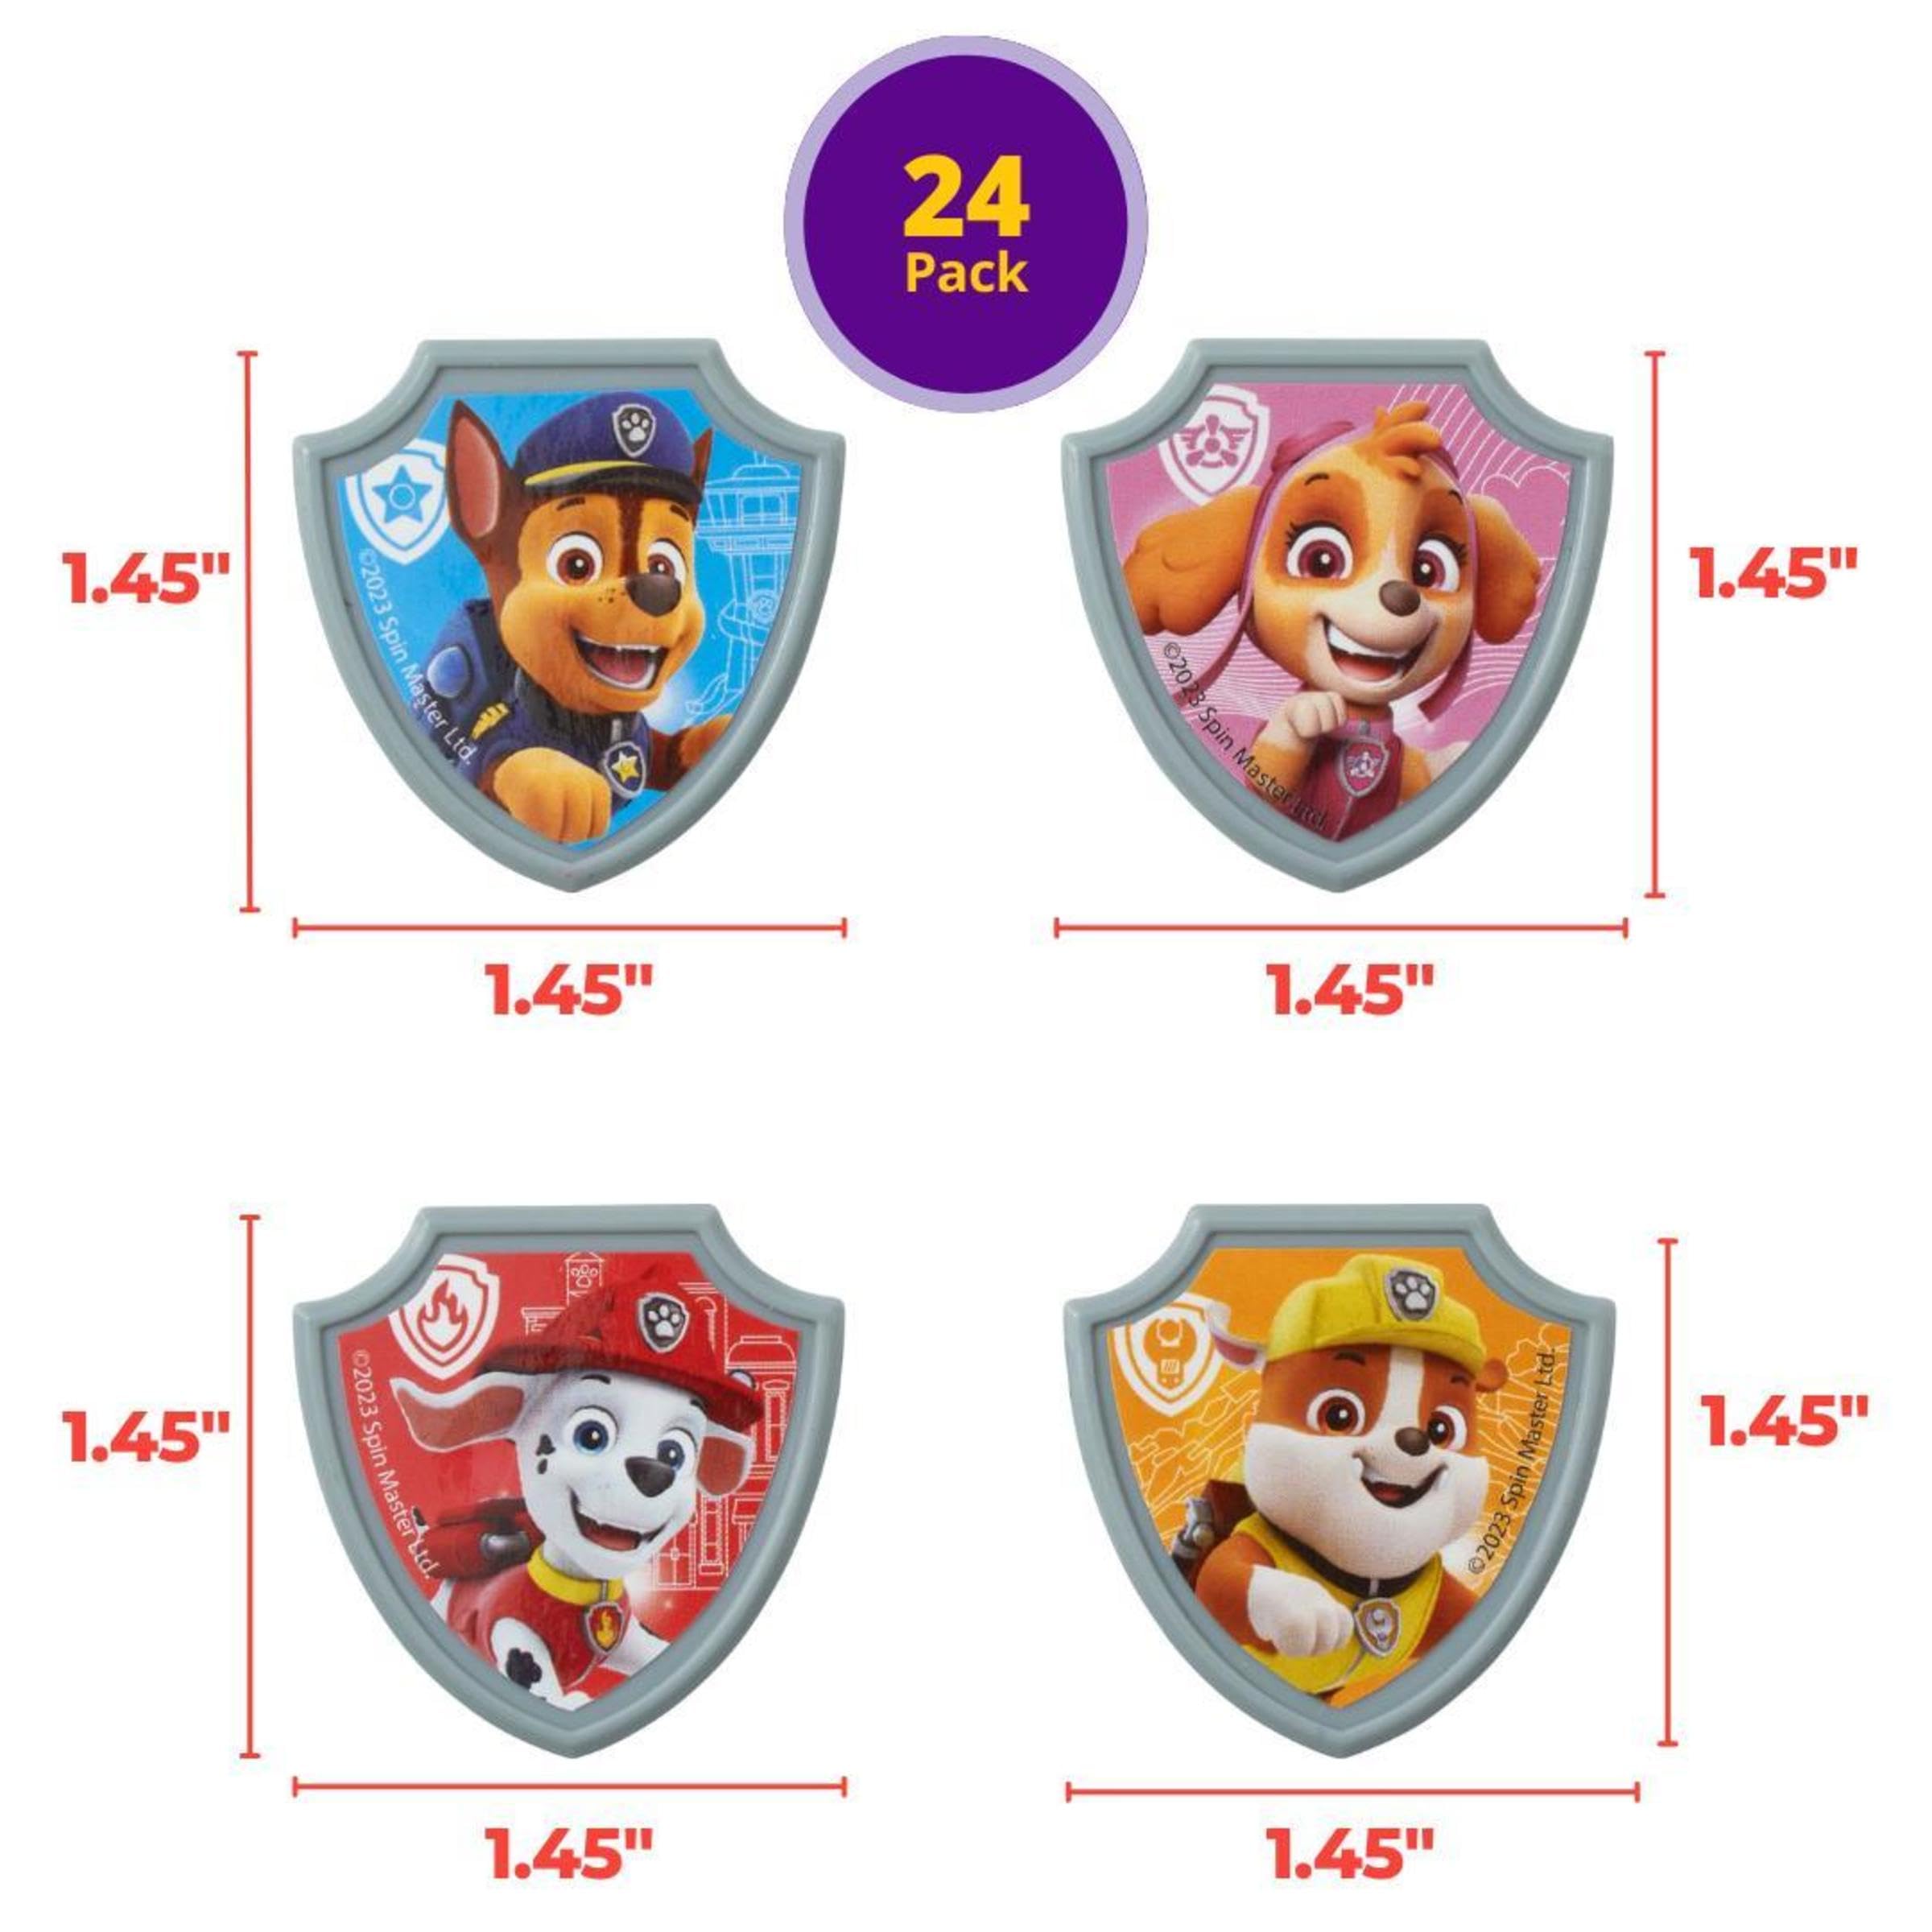 DecoPac Paw Patrol Reporting For Duty Rings, Cupcake Decorations Featuring Rocky, Marshall, Skye, And Rubble - 24 Pack